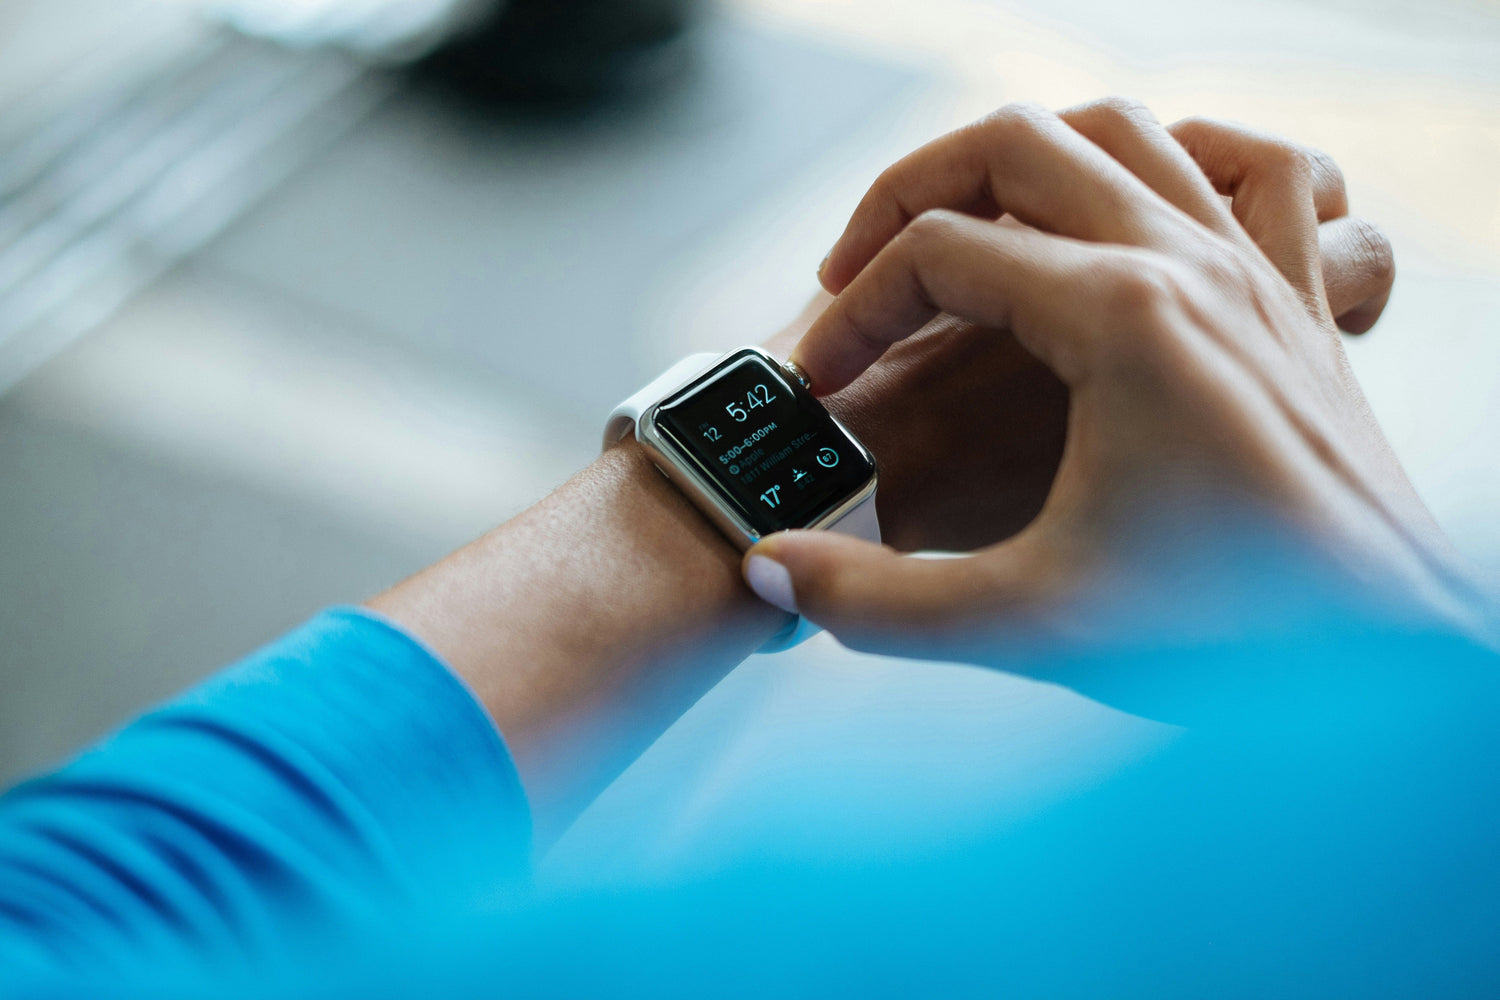 Three Key Metrics to Monitor on Your Wearable Device